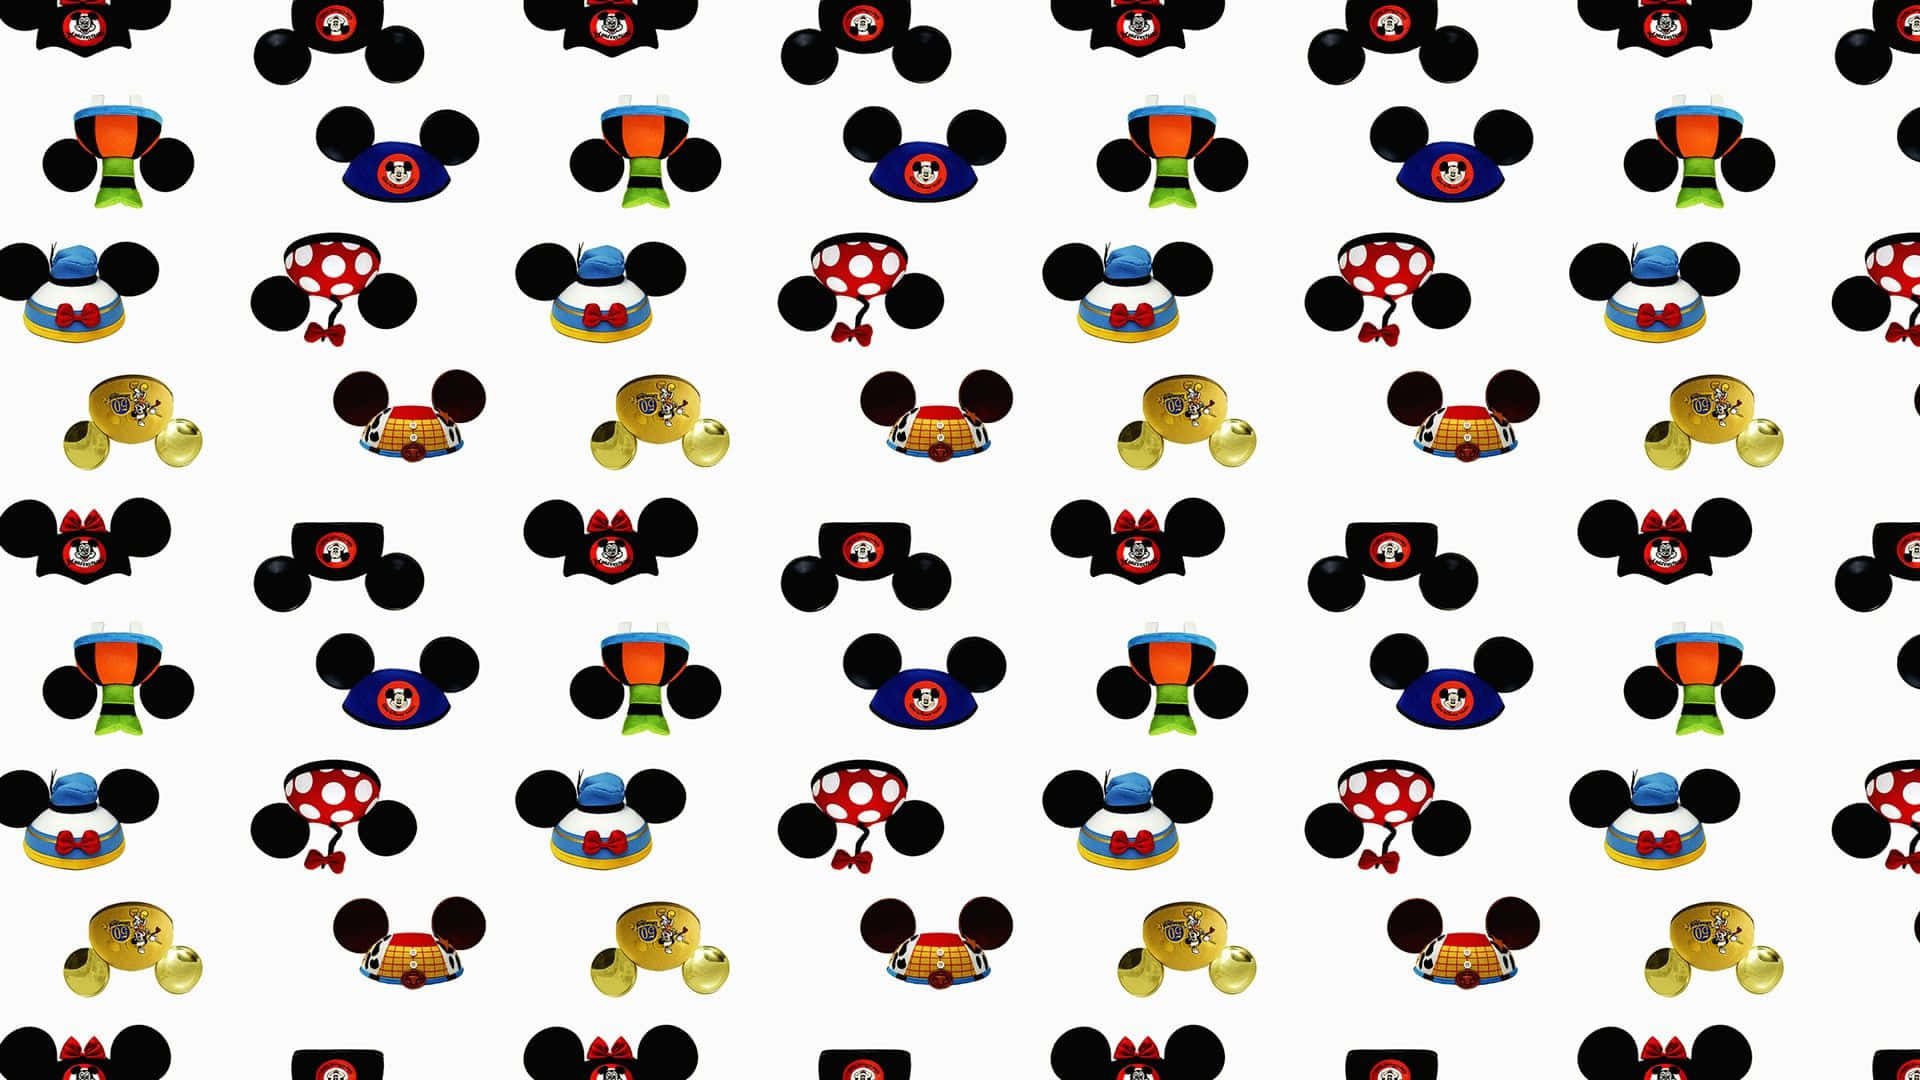 “Uniquely Styled Mickey Mouse Ears” Wallpaper